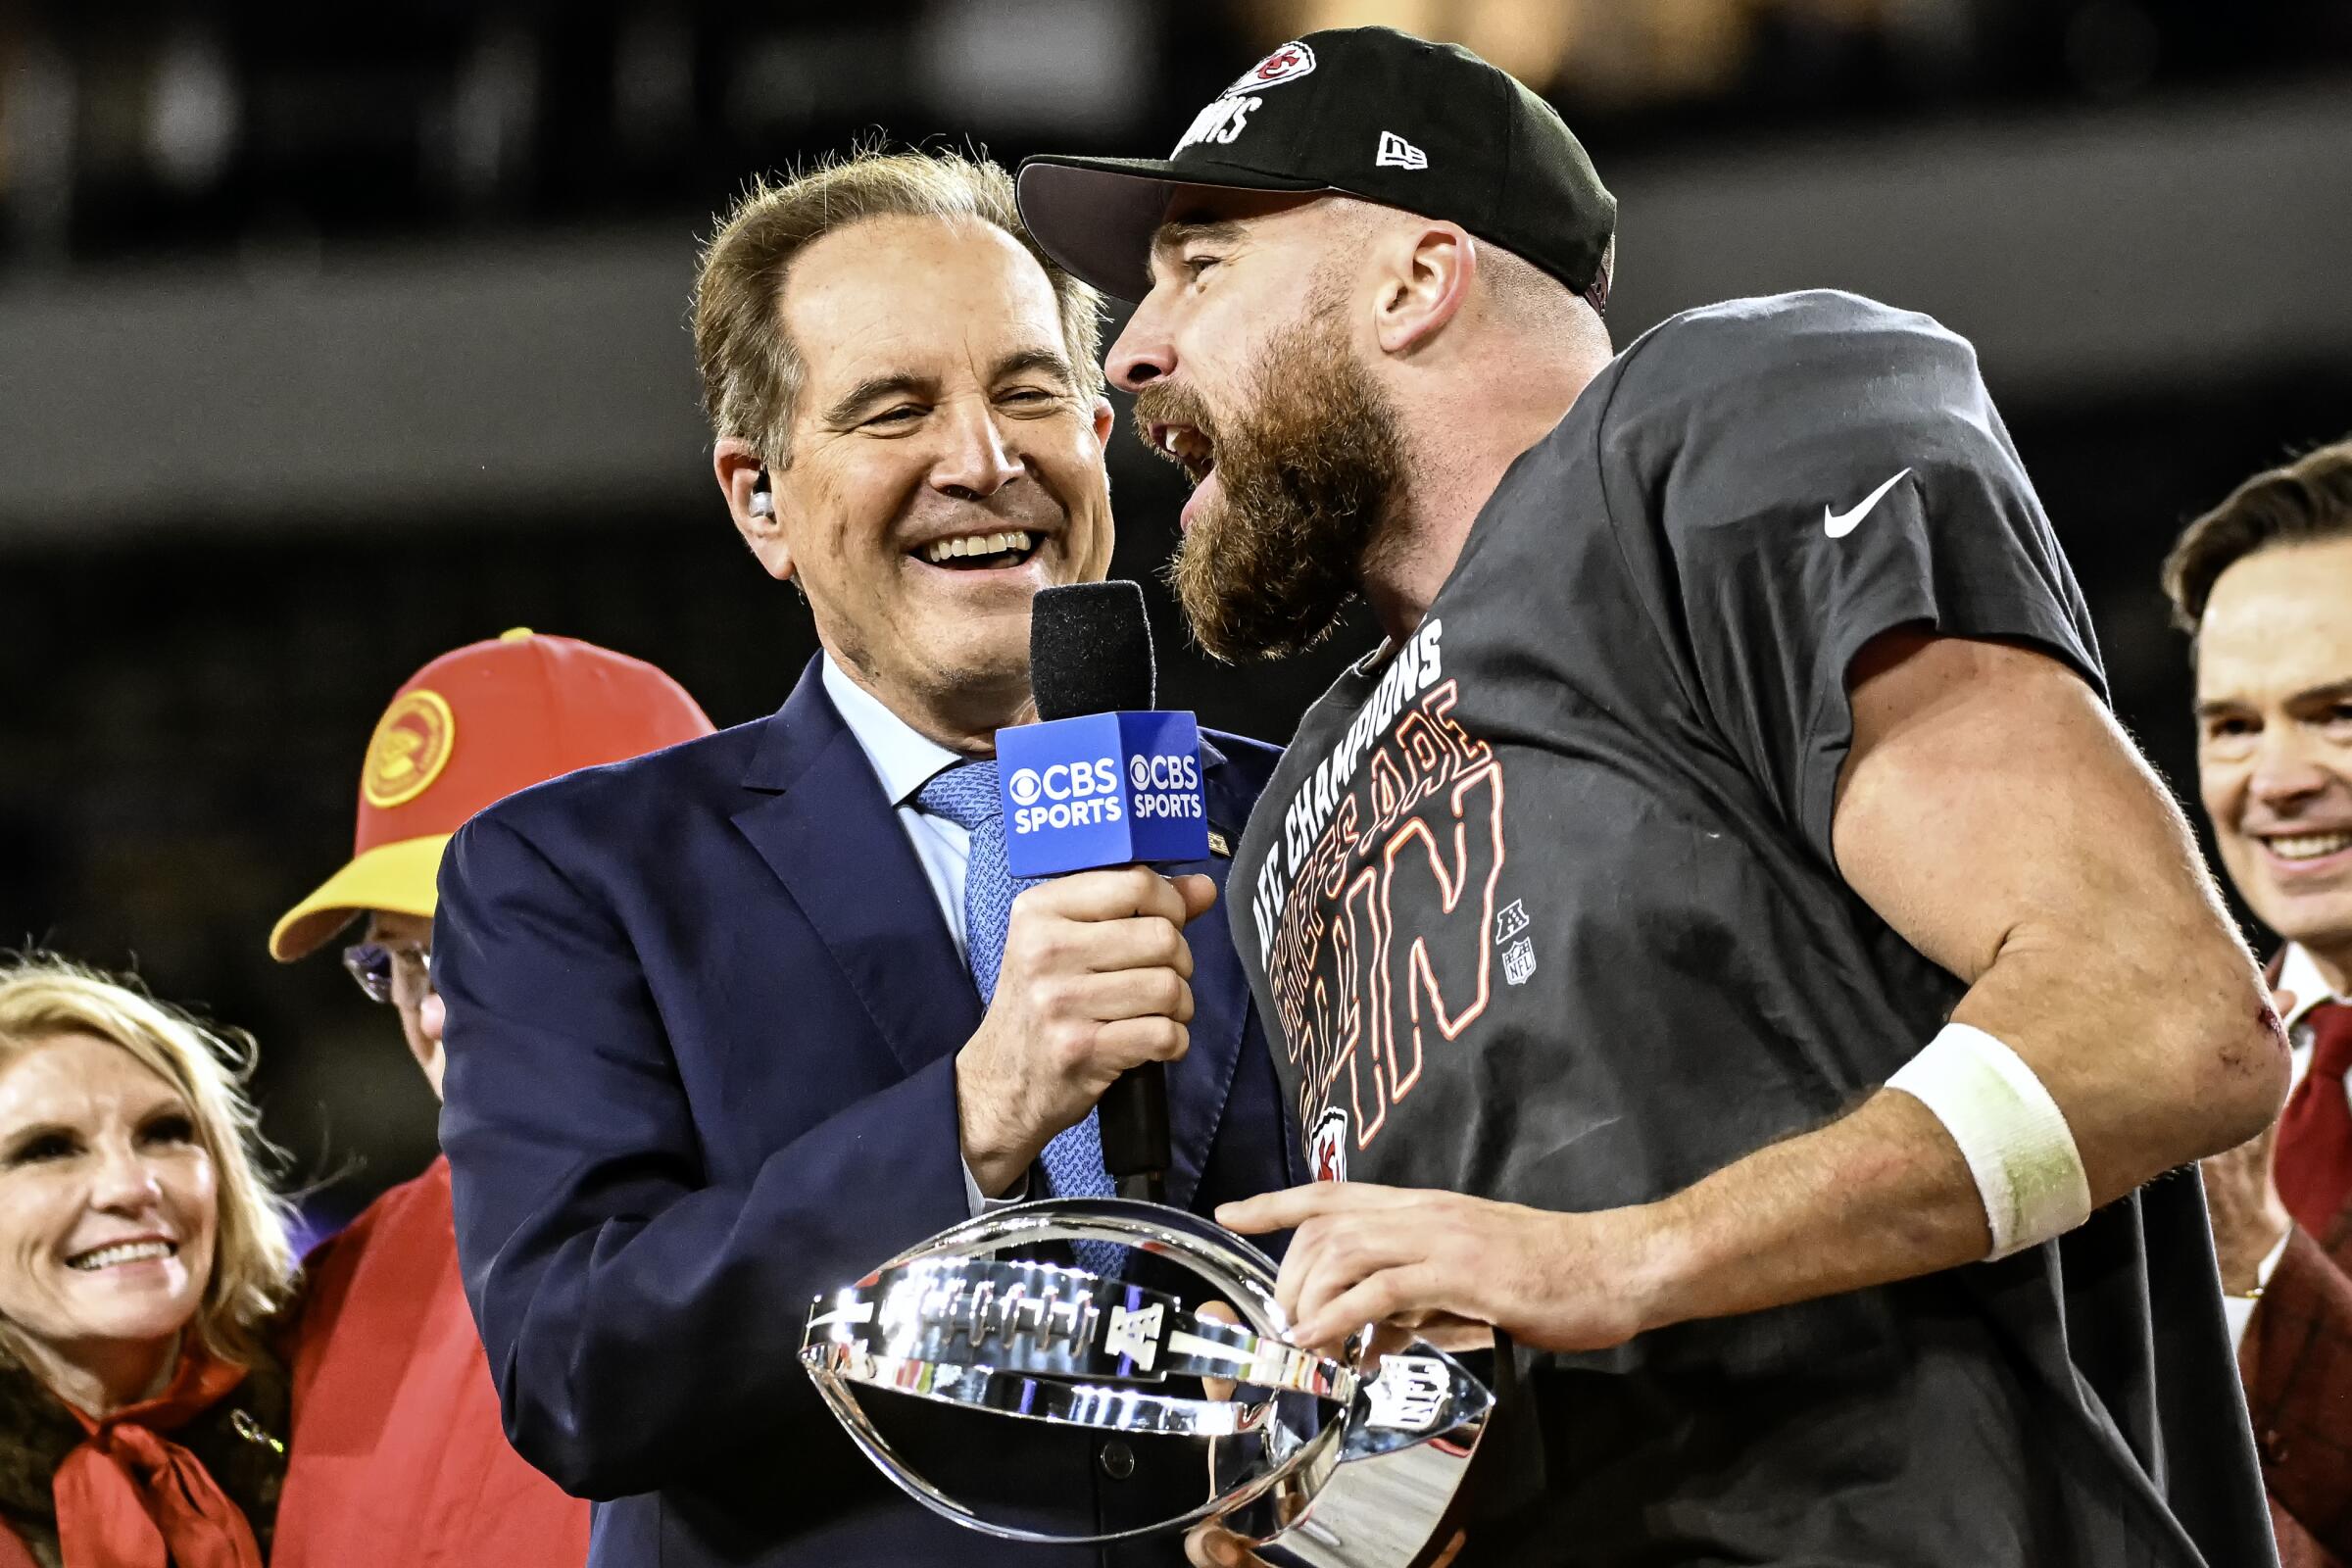 CBS broadcaster Jim Nantz shares a moment on stage with Kansas City tight end Travis Kelce.